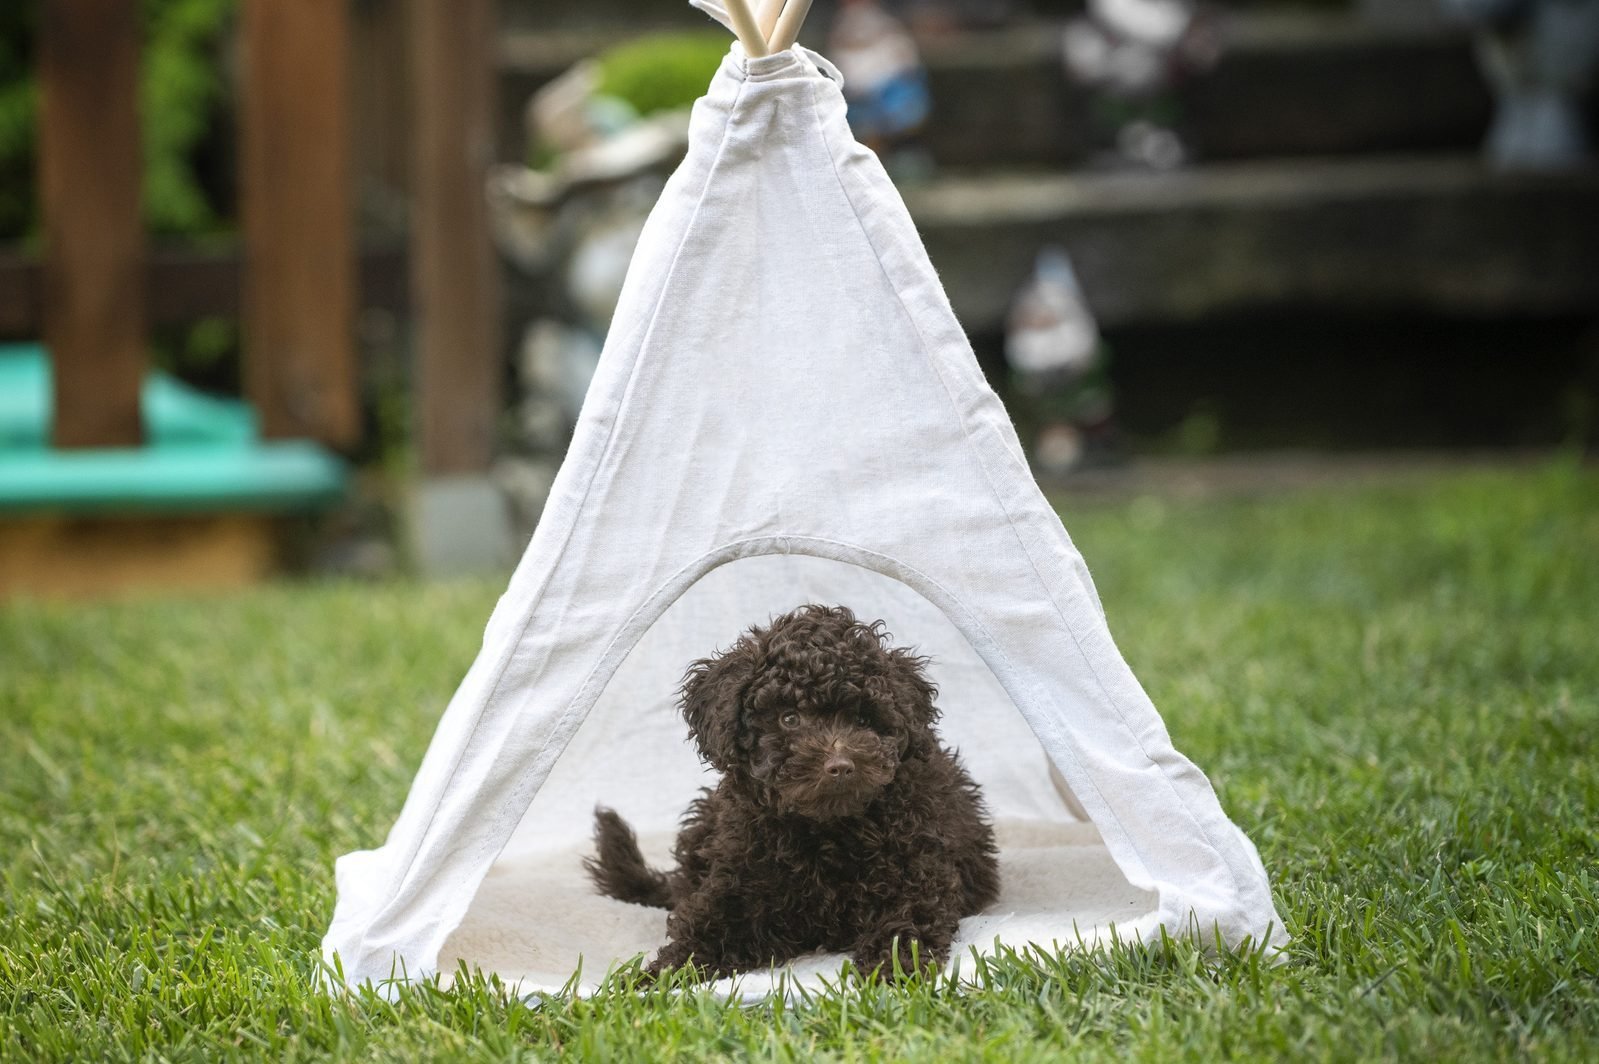 Cute Brown toy poodle puppy resting inside a teepee tent